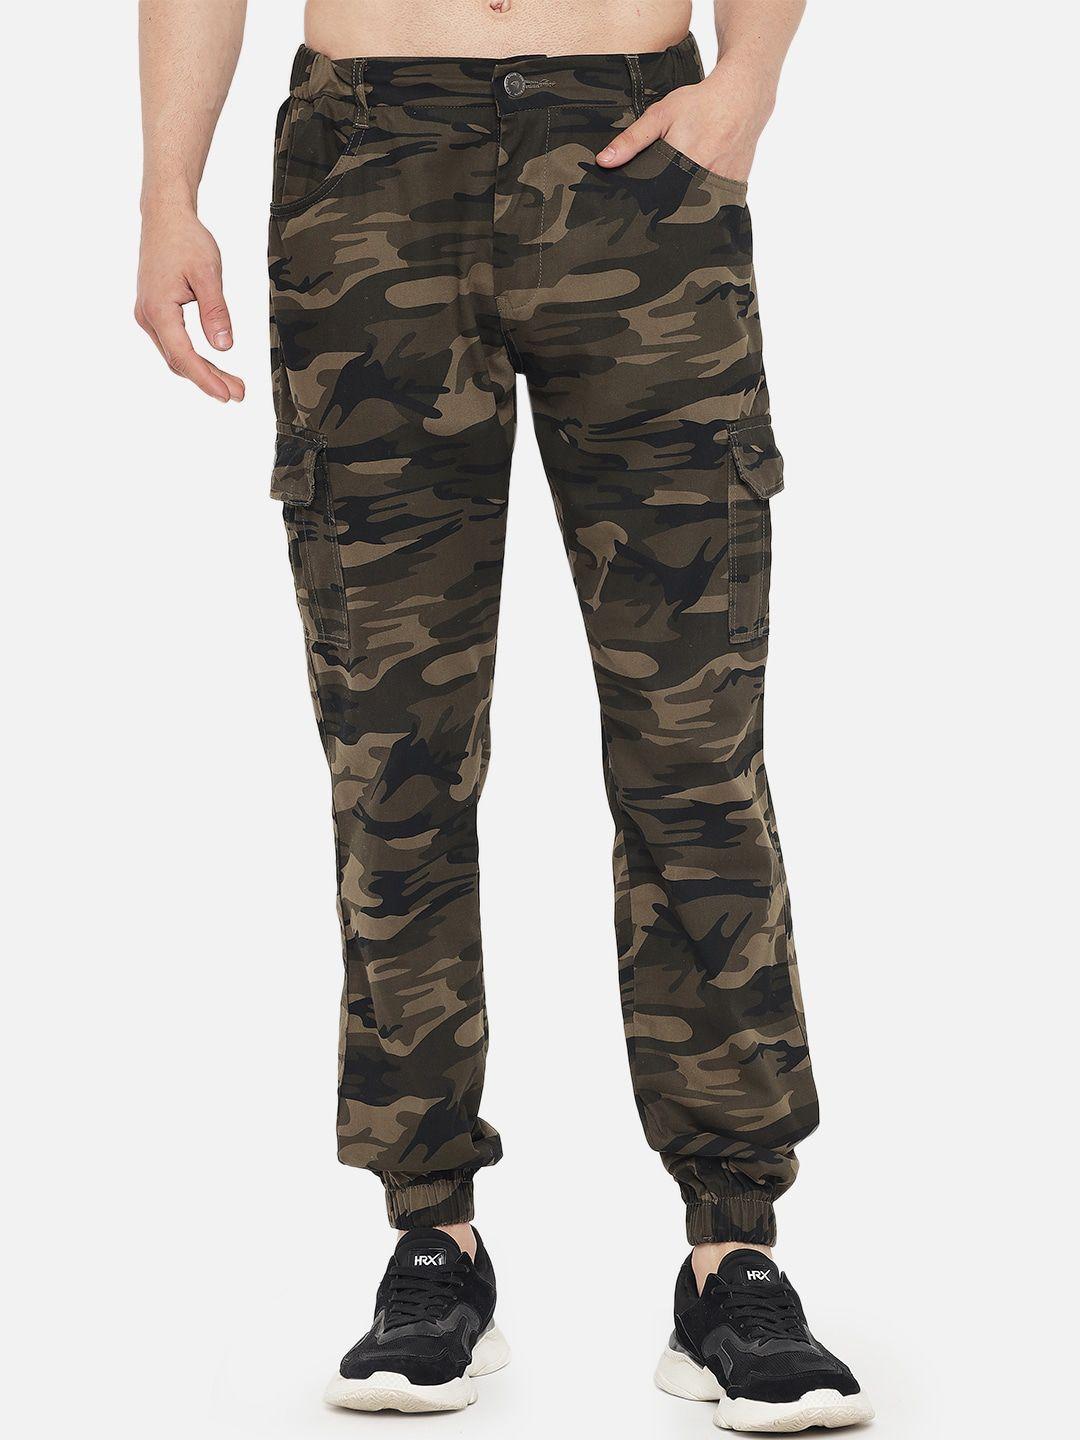 the dry state men camouflage printed relaxed loose fit cotton cargos trouser